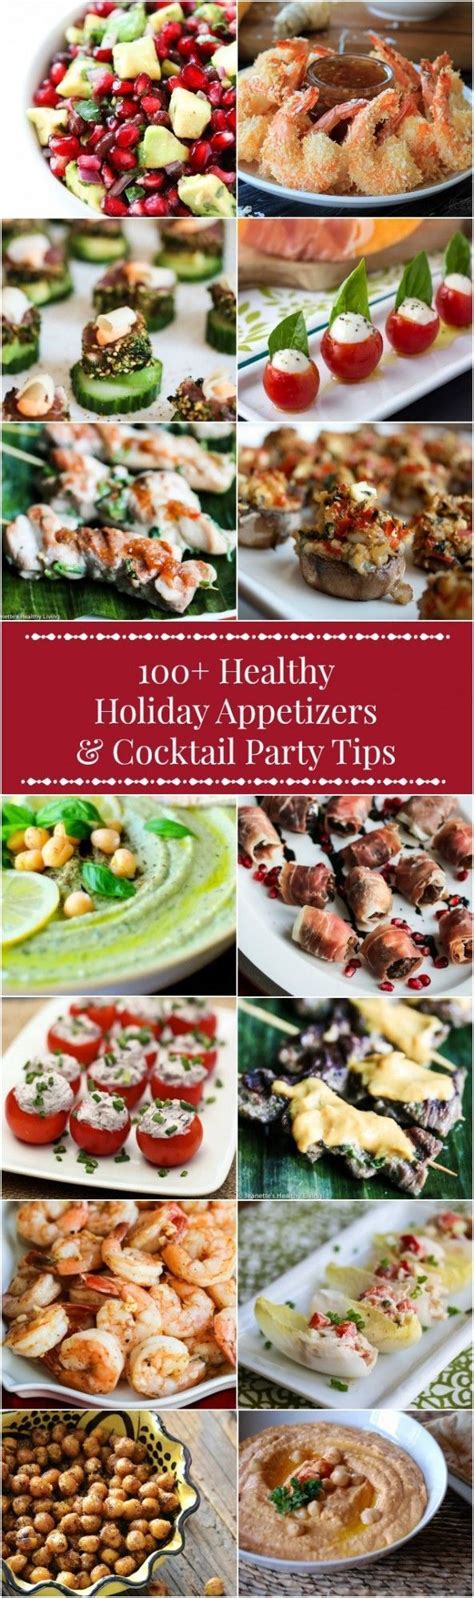 Next time you're planning a party, add some of these addicting appetizers to the menu. 100+ Healthy Holiday Appetizer Recipes + Cocktail Party ...